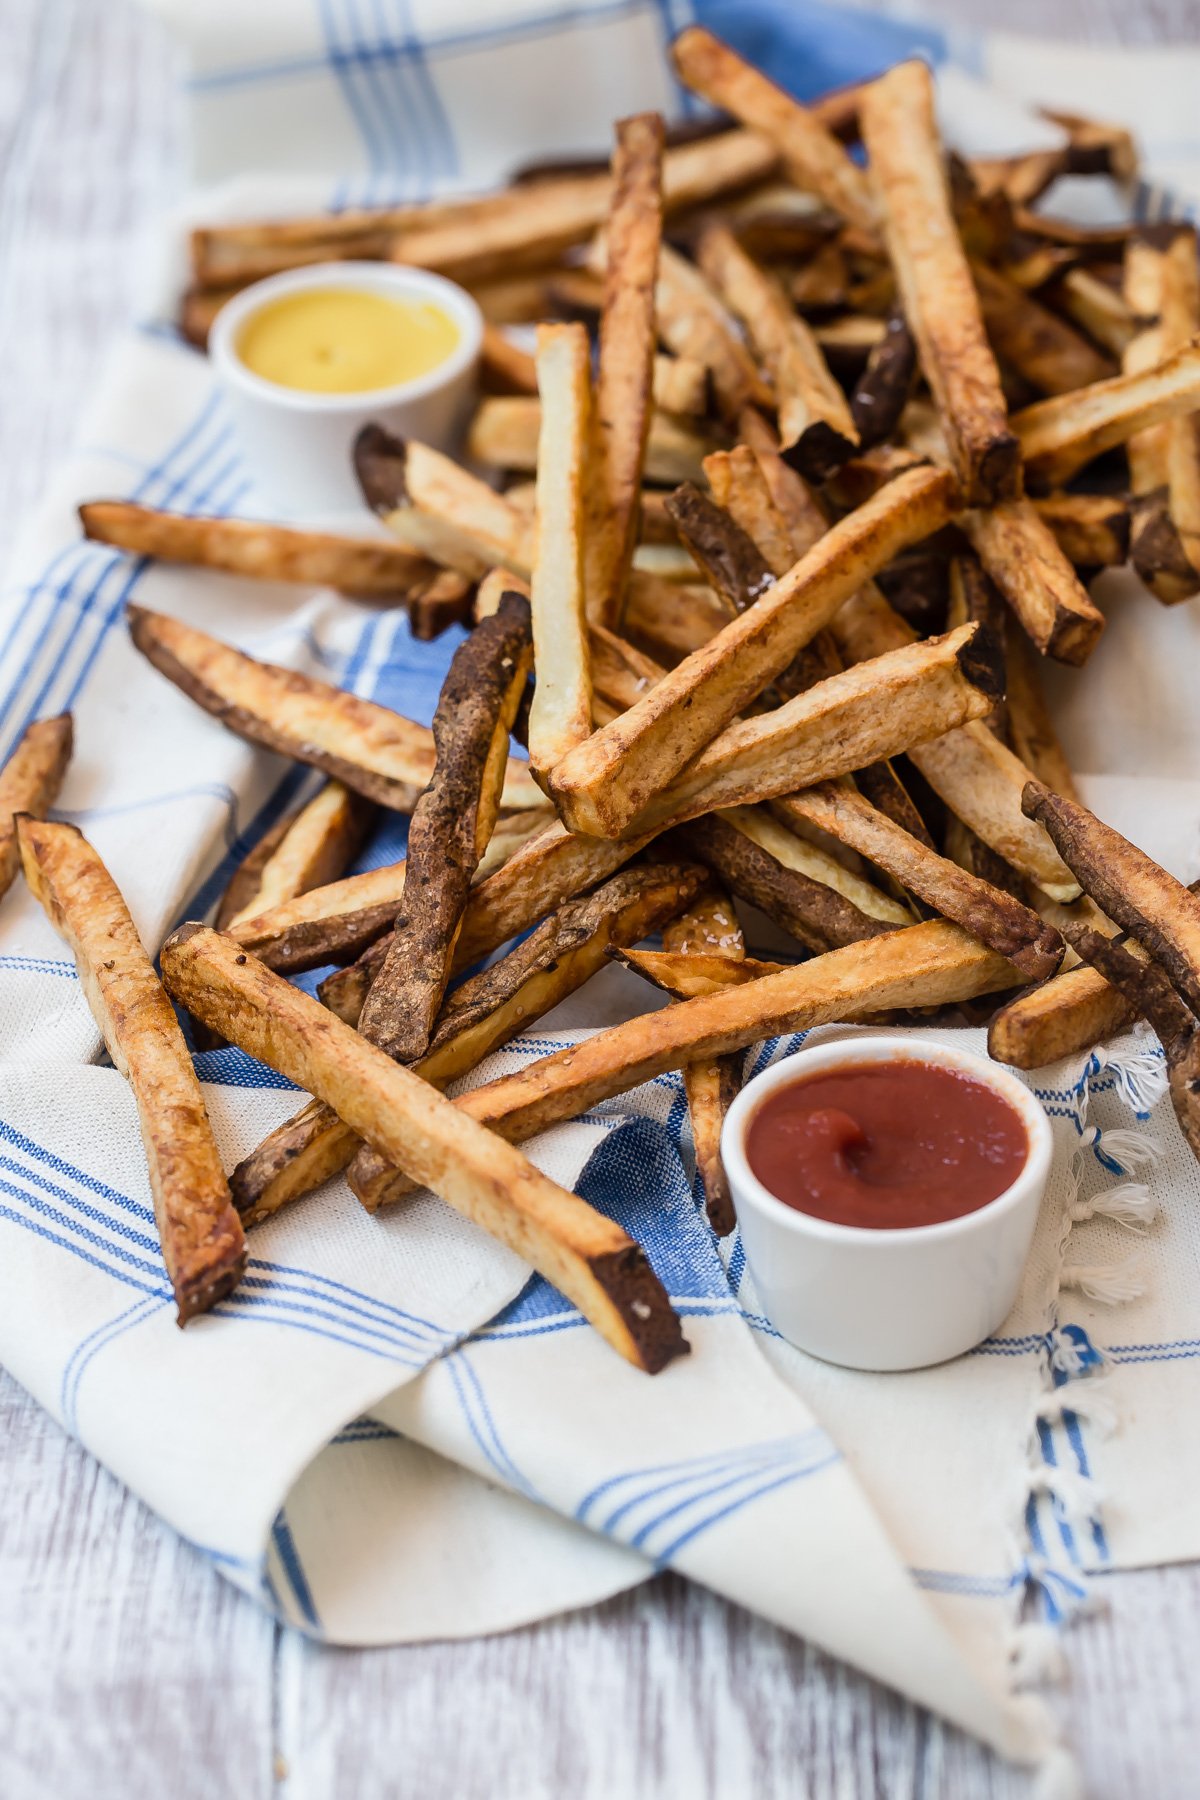 Air fryer french fries on tea towel.